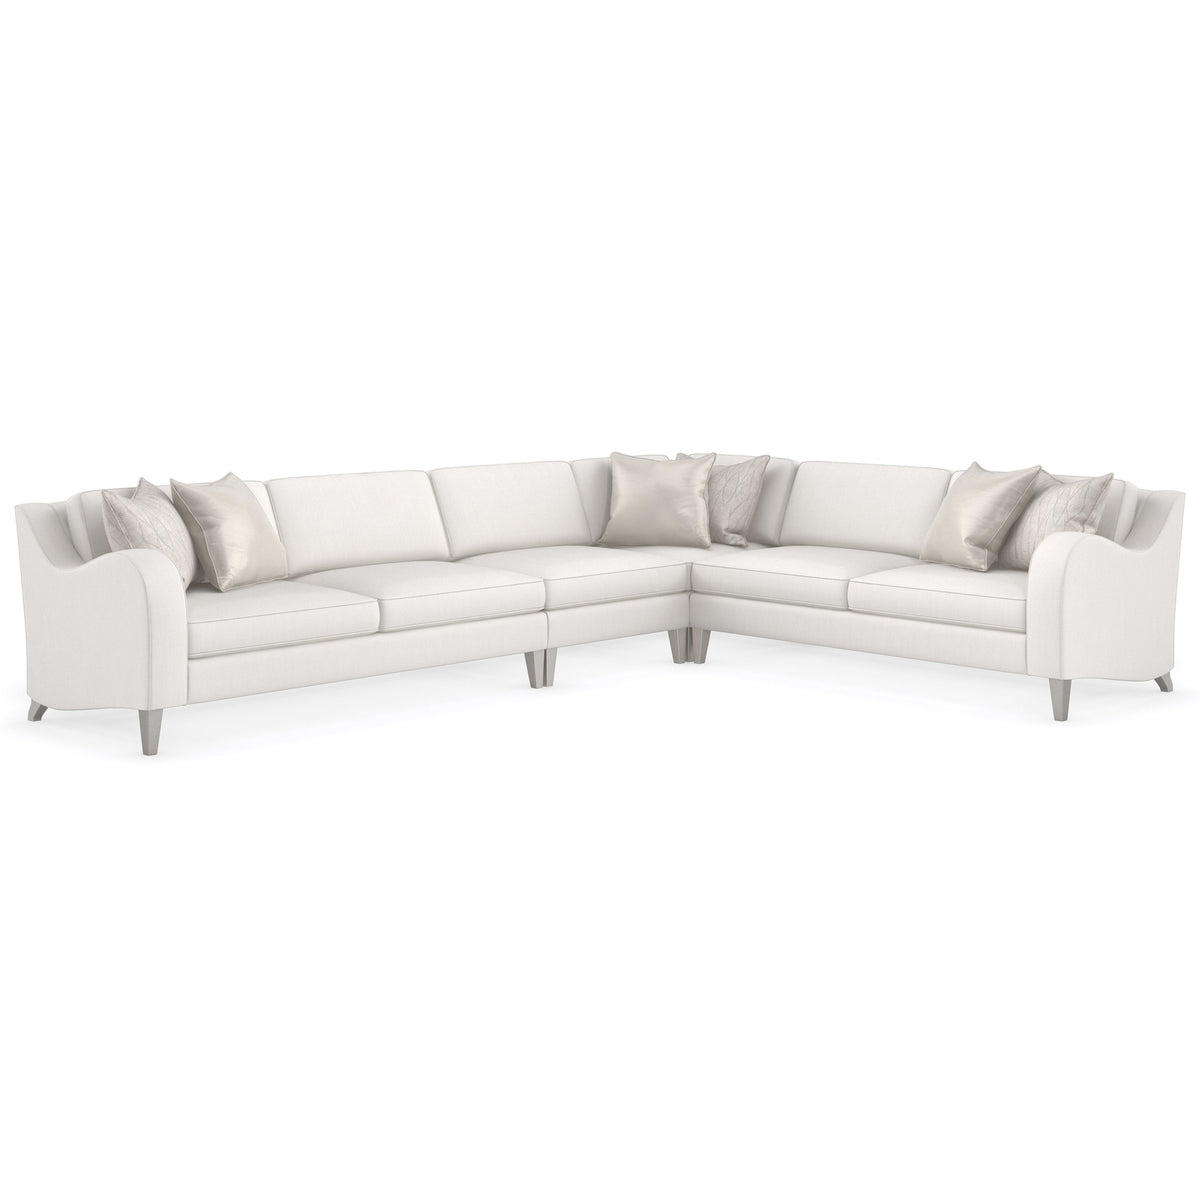 High sectional sofa bed with tapered metal legs Richard